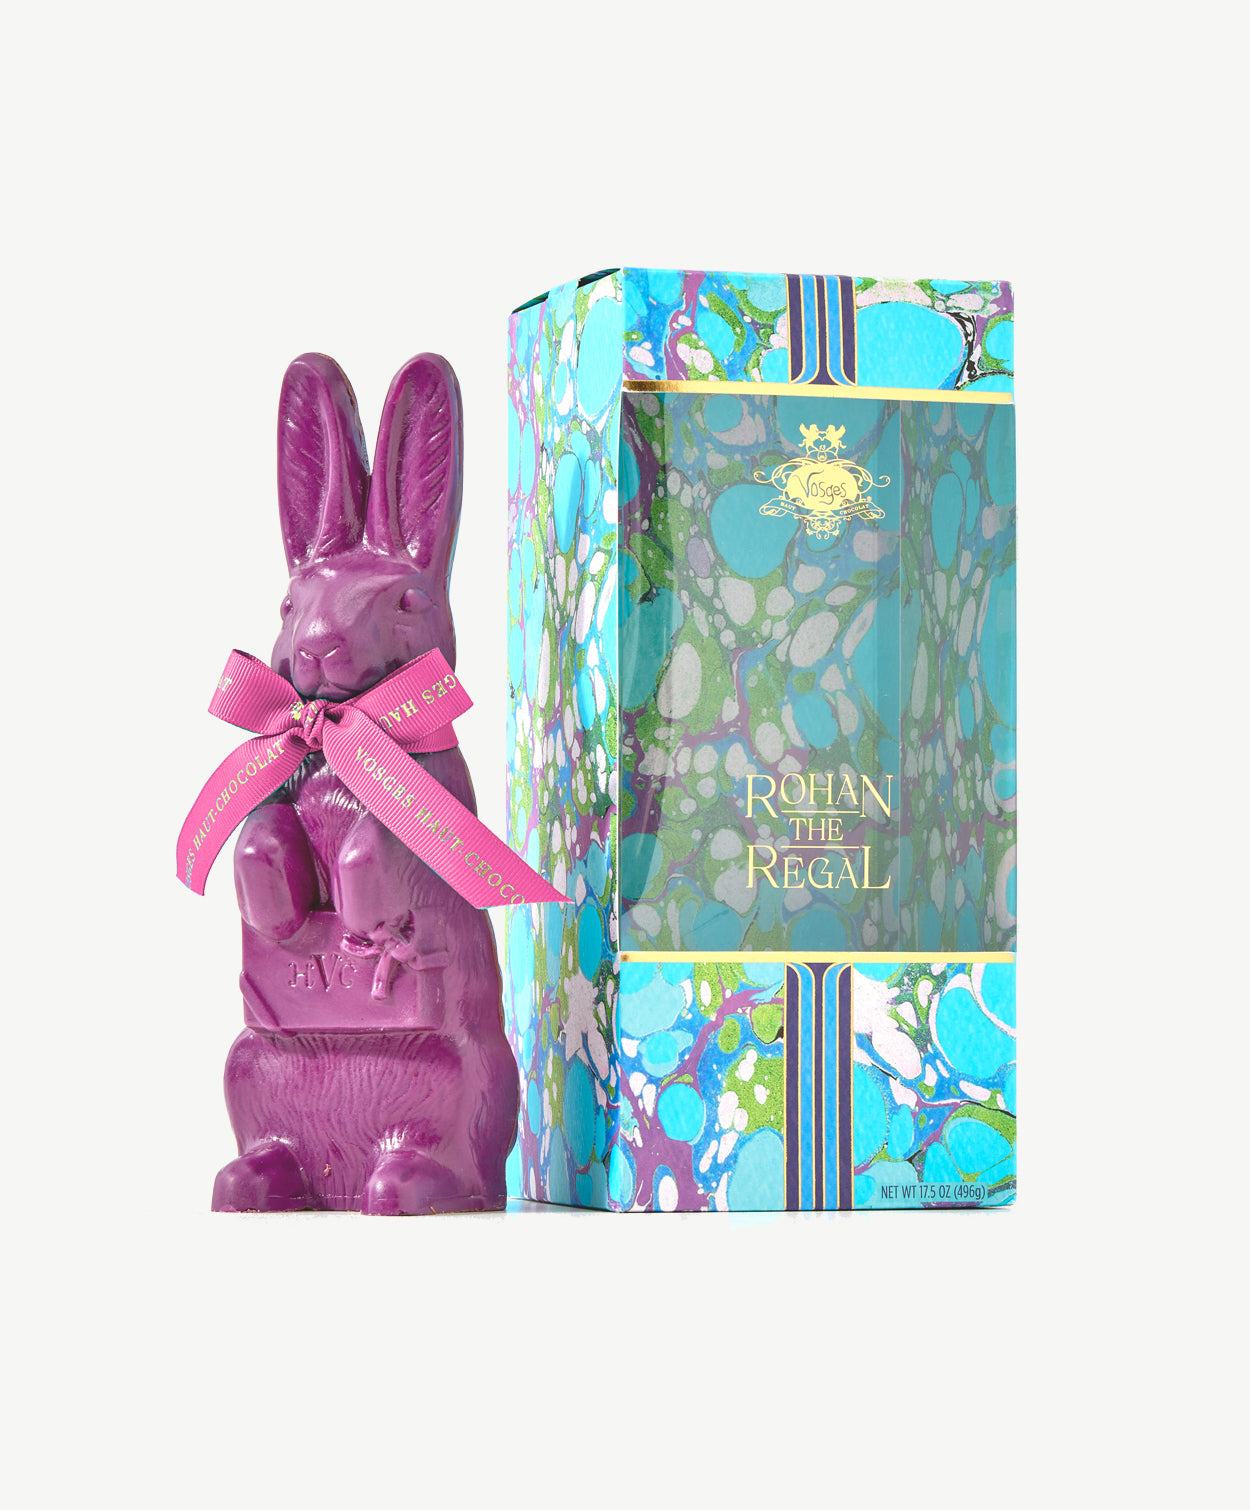 A tall purple chocolate rabbit wearing a pink ribbon bow stands beside a sky blue tie-dyed chocolate box embossed in gold foil on a white background.  